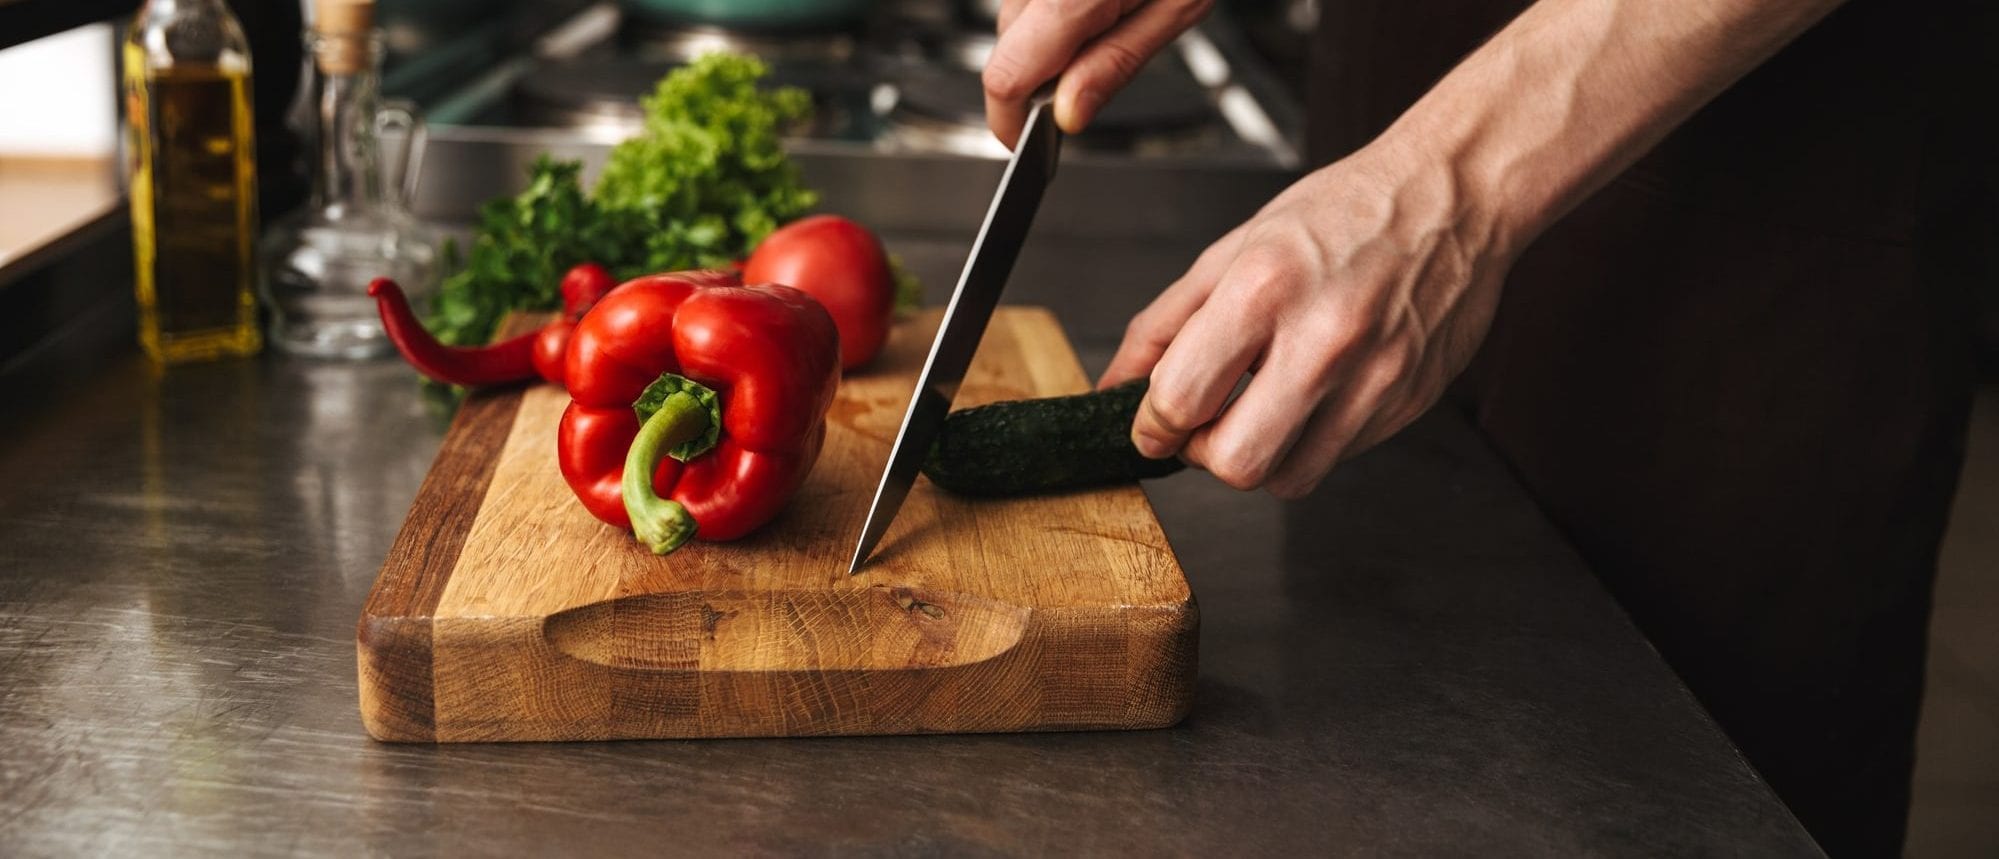 Close up of a man hands chopping vegetables on